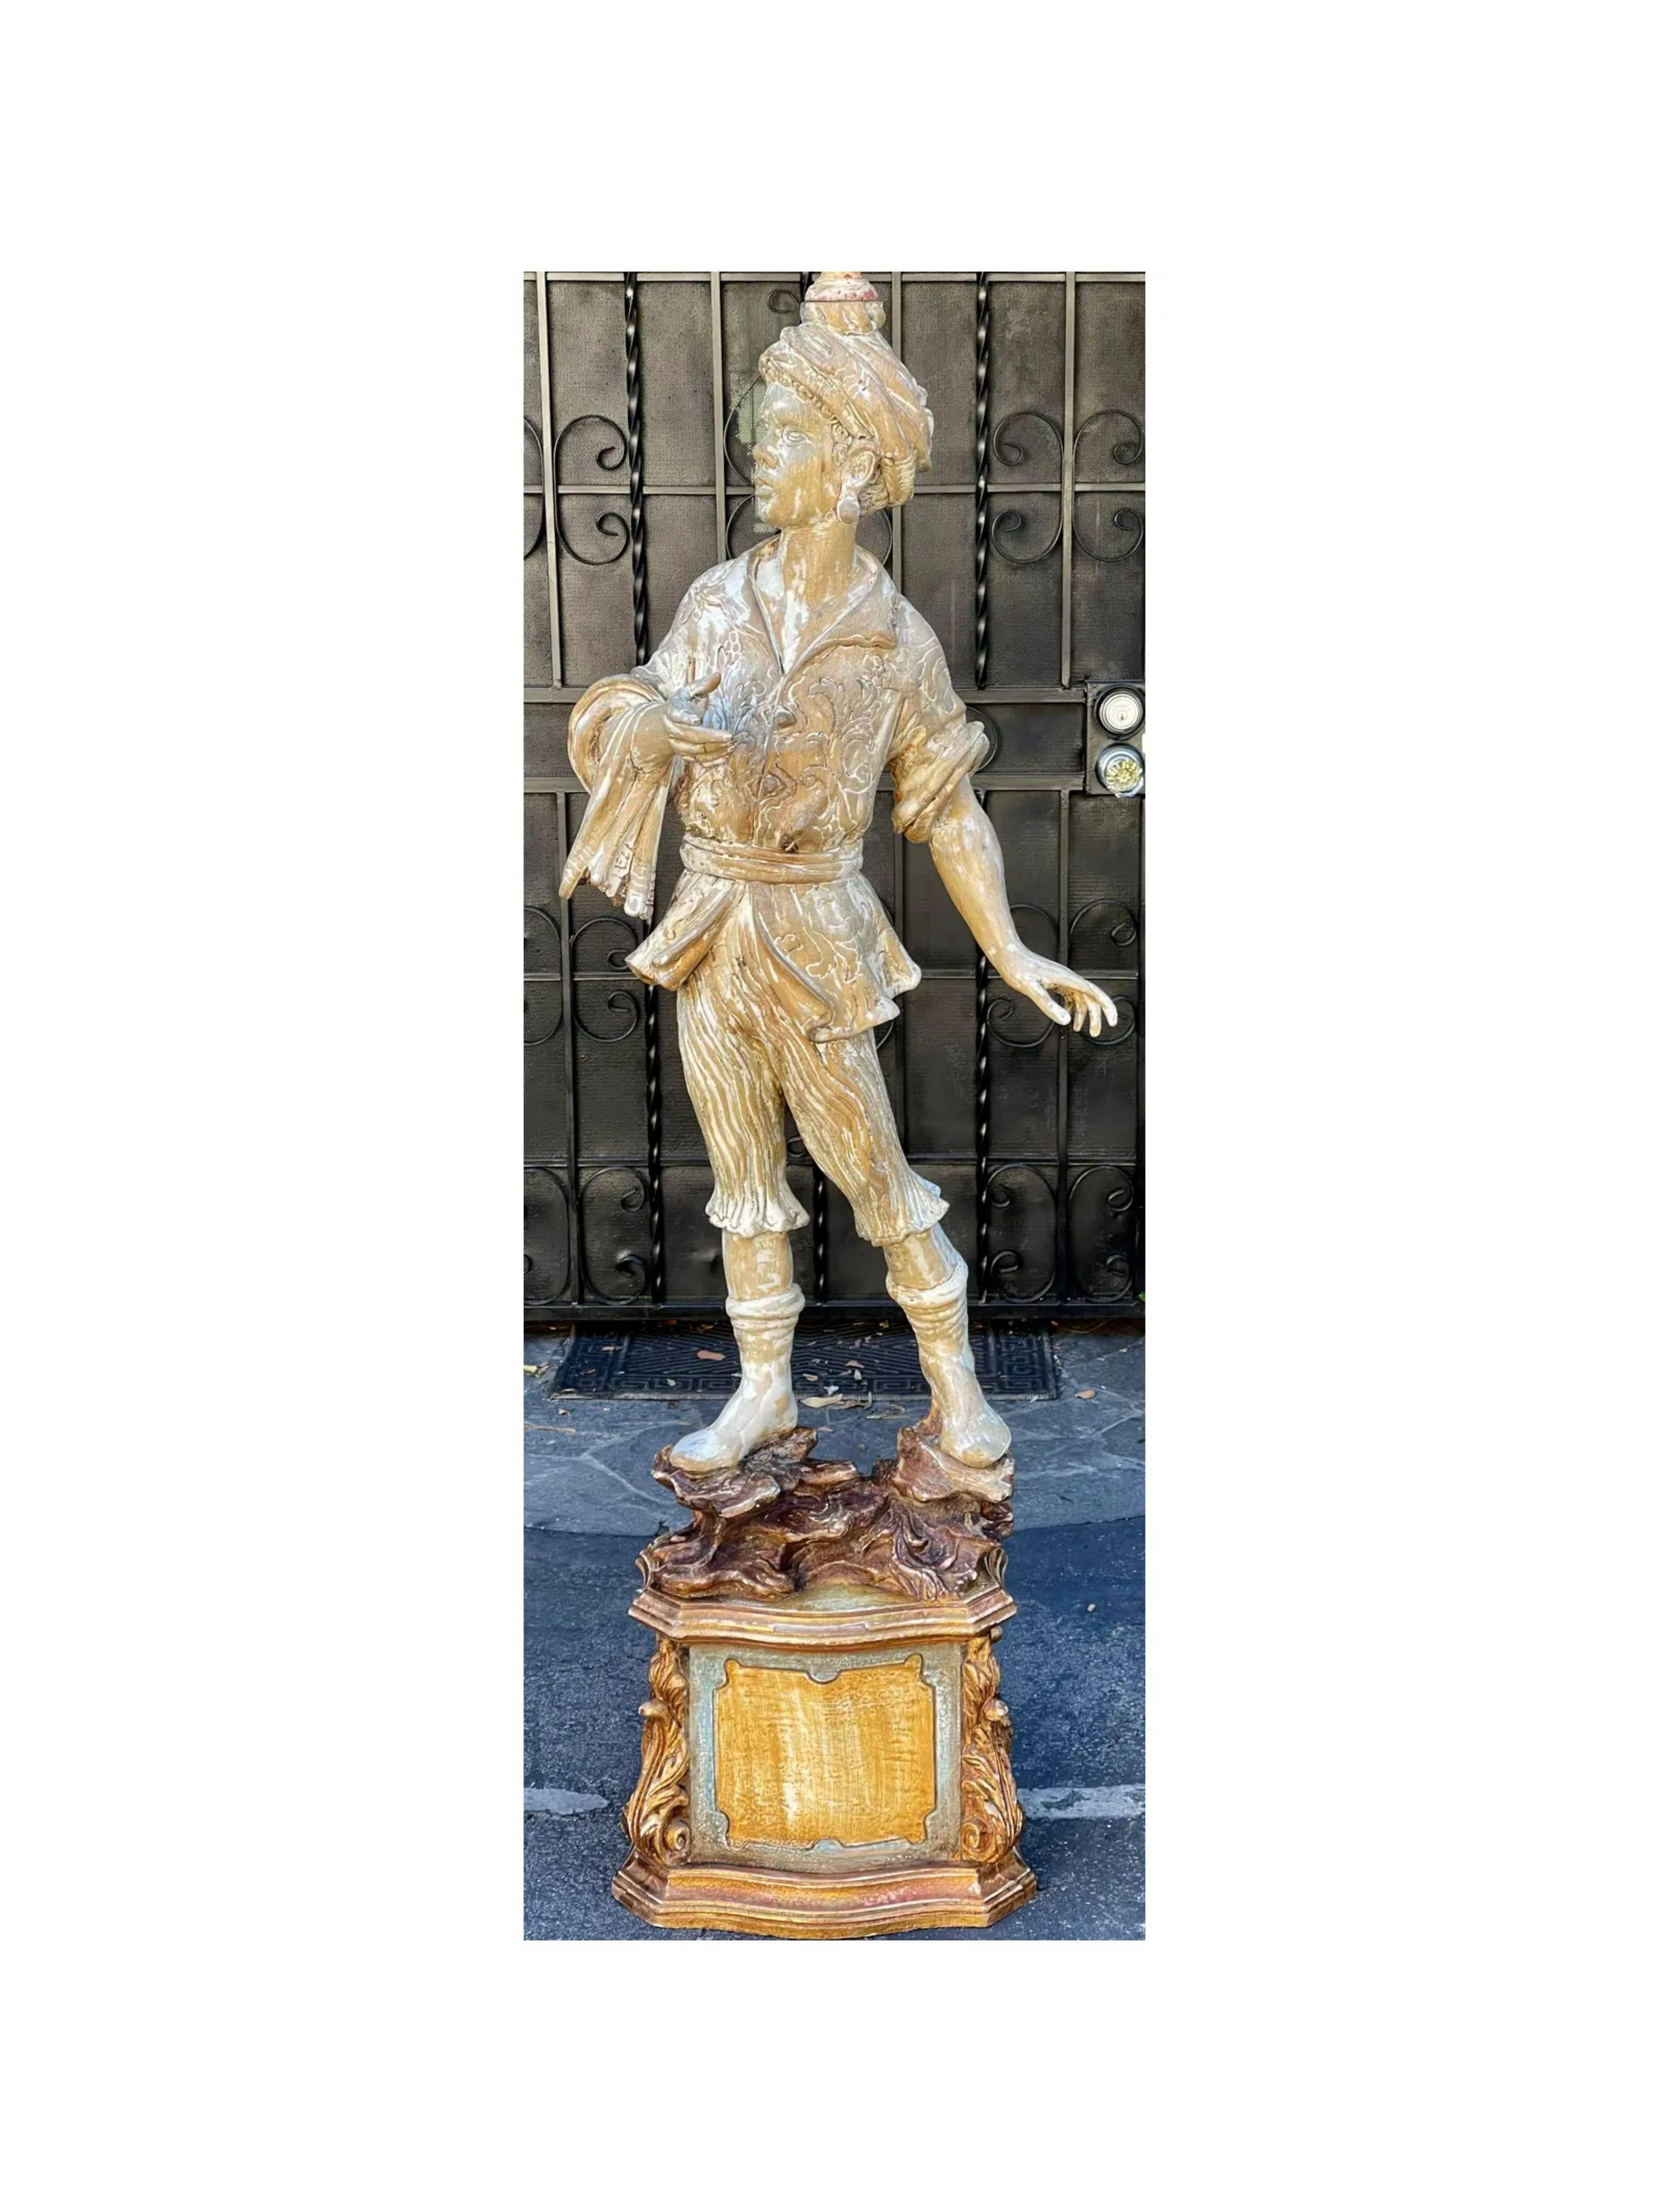 Antique Italian Figural Standing Candelabra Floor Lamp, Early 20th Century For Sale 3